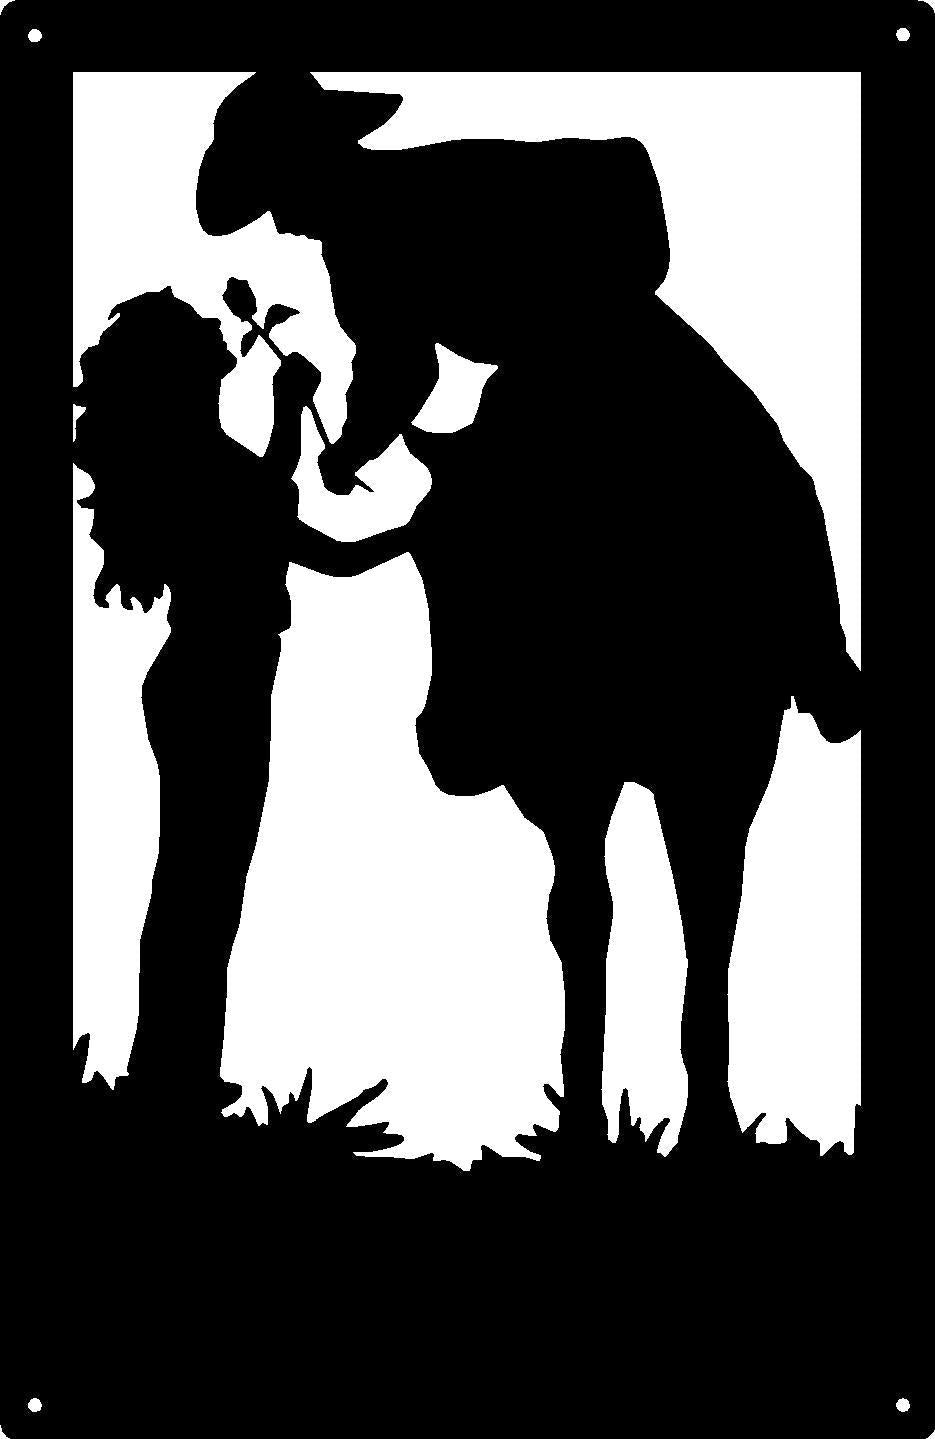 Cowboy and Cowgirl Romantic Couple Wall Art Sign - The Metal Peddler  cowboy, cowboy and cowgirl, cowgirl, horse